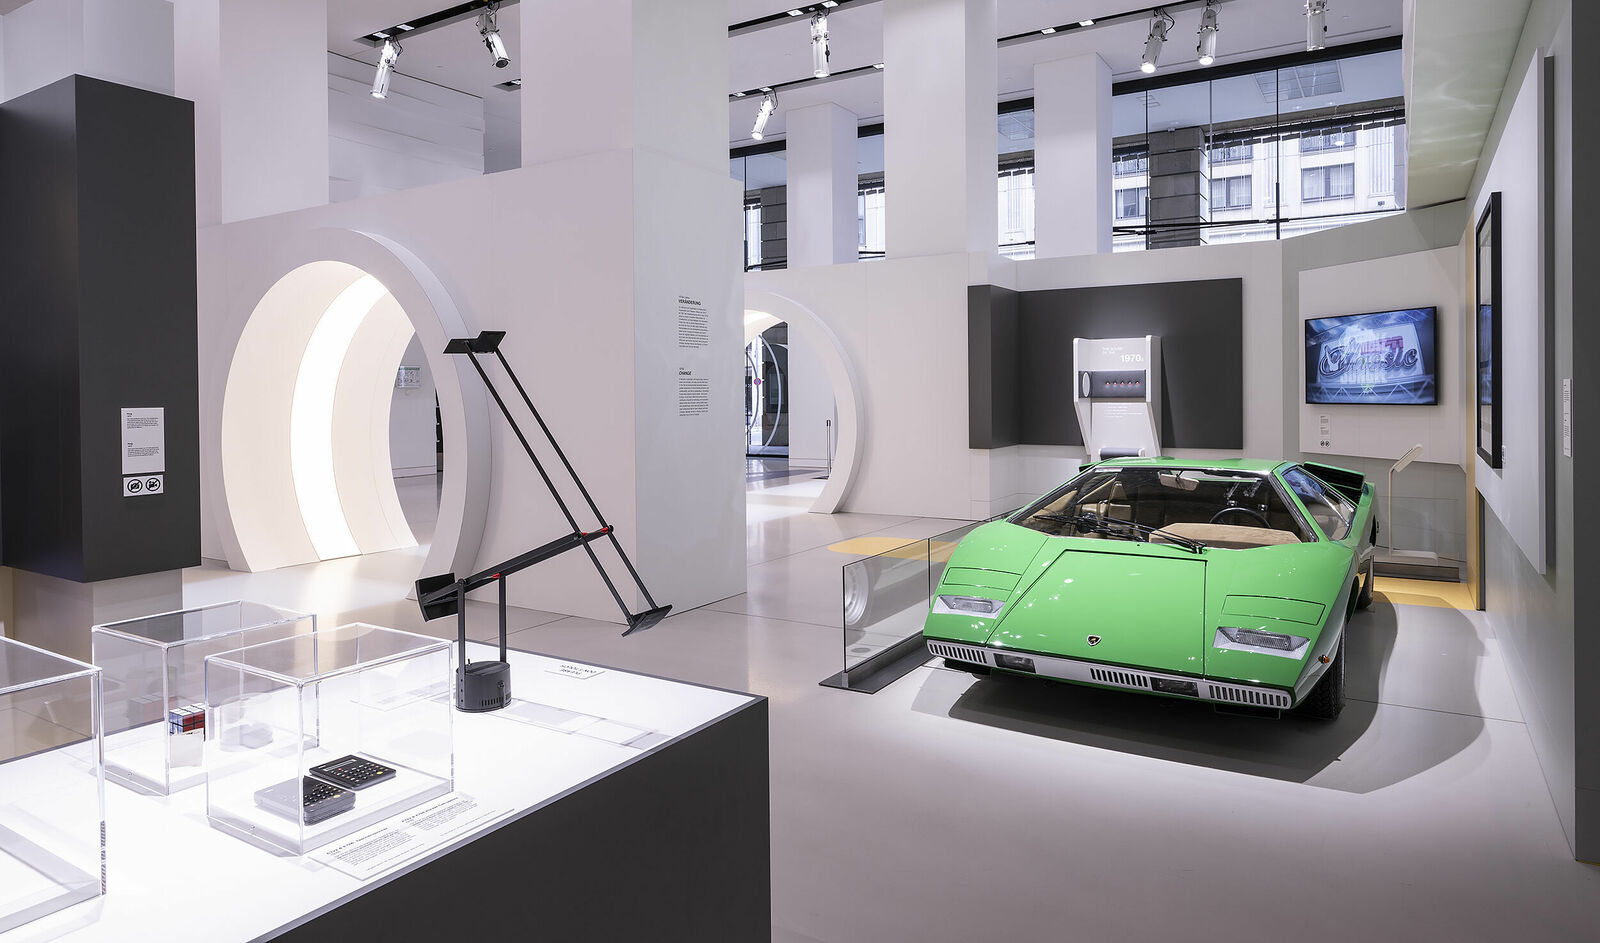 Interior view of a car museum featuring a lime green Lamborghini, surrounded by informational displays.